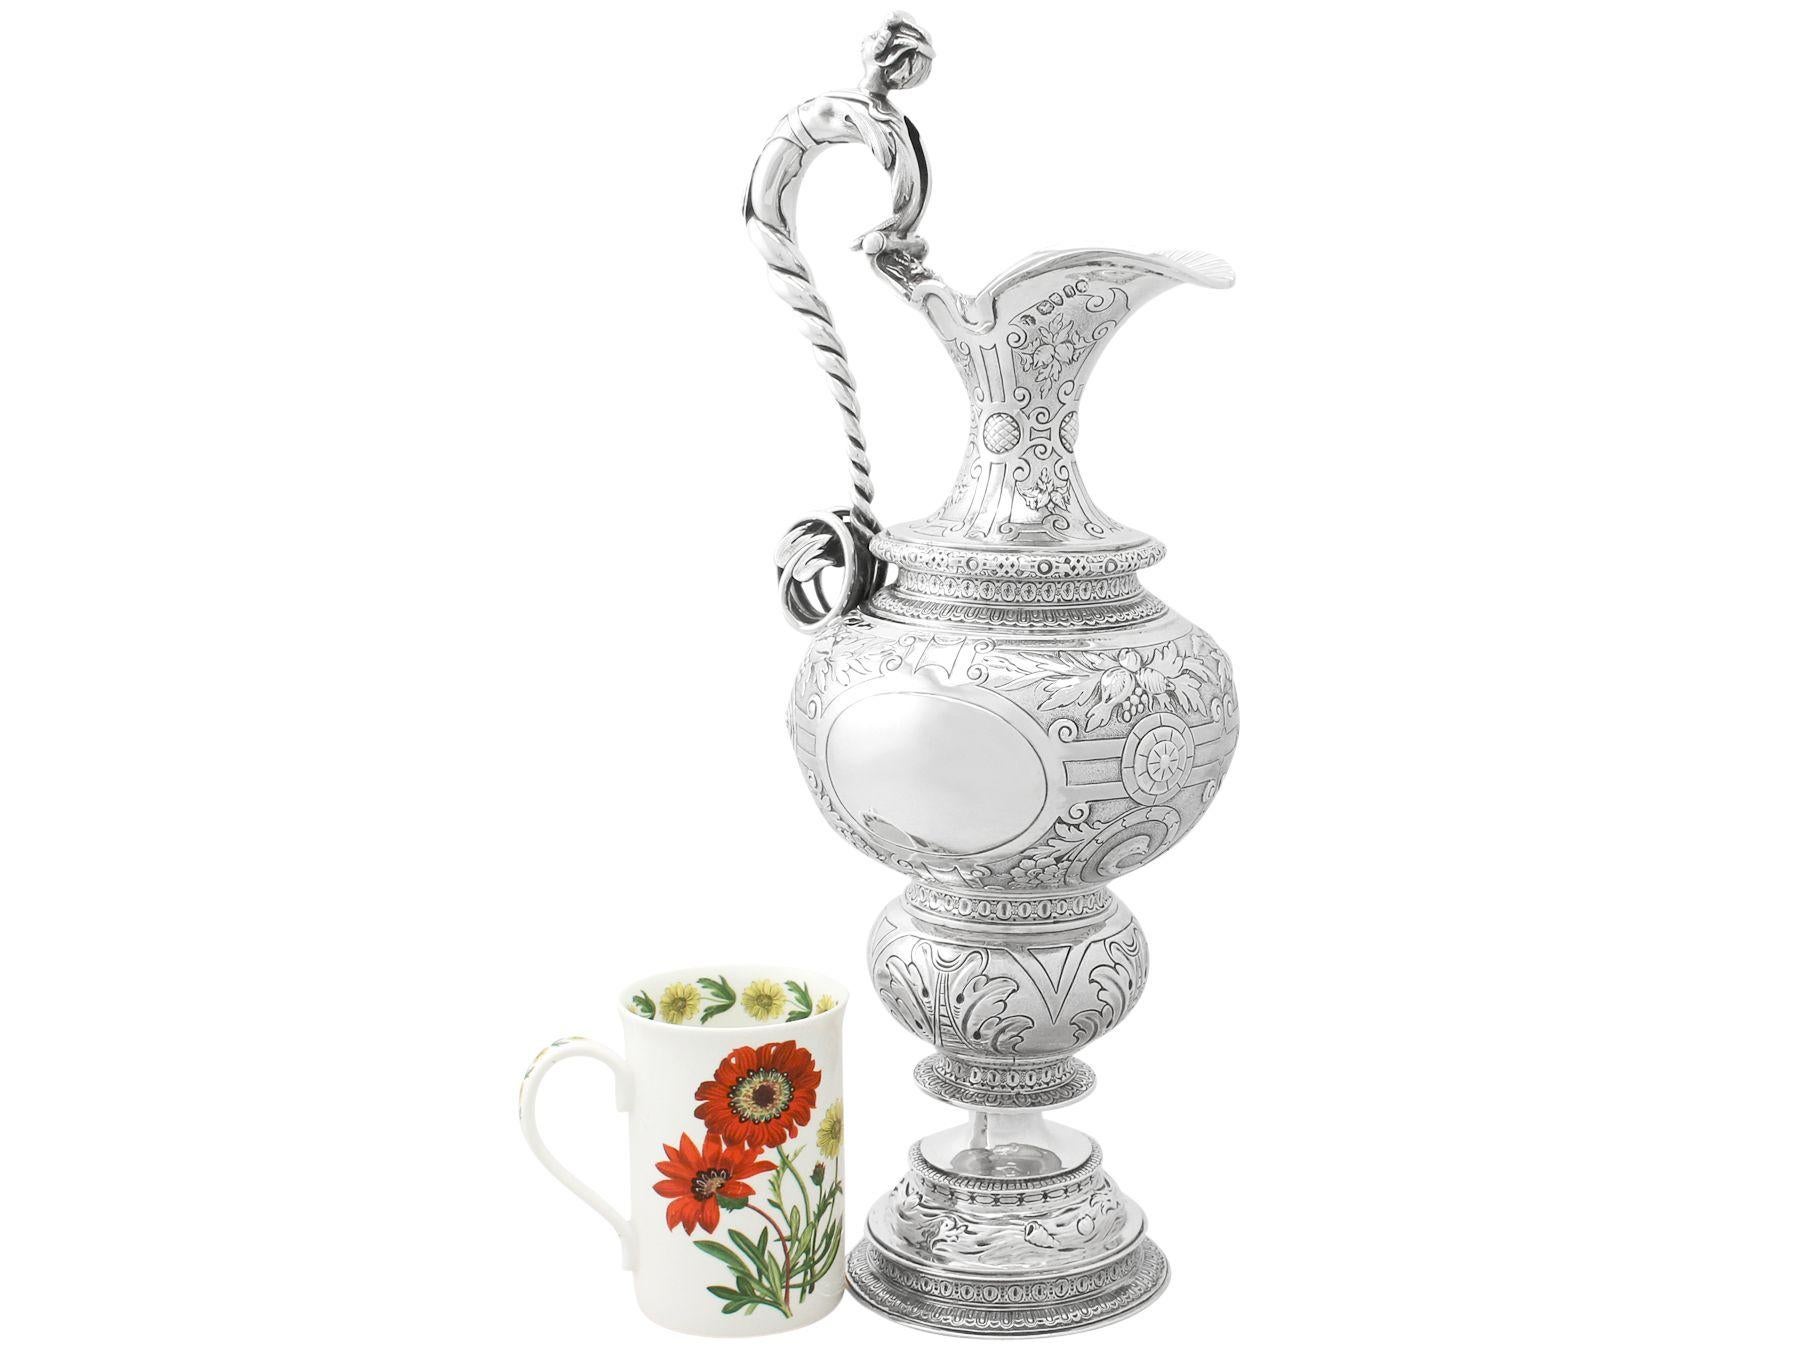 An exceptional, fine and impressive antique Victorian English sterling silver claret jug, made by George Fox; an addition to our diverse wine and drinks related collection.

This exceptional antique Victorian sterling silver claret jug has a